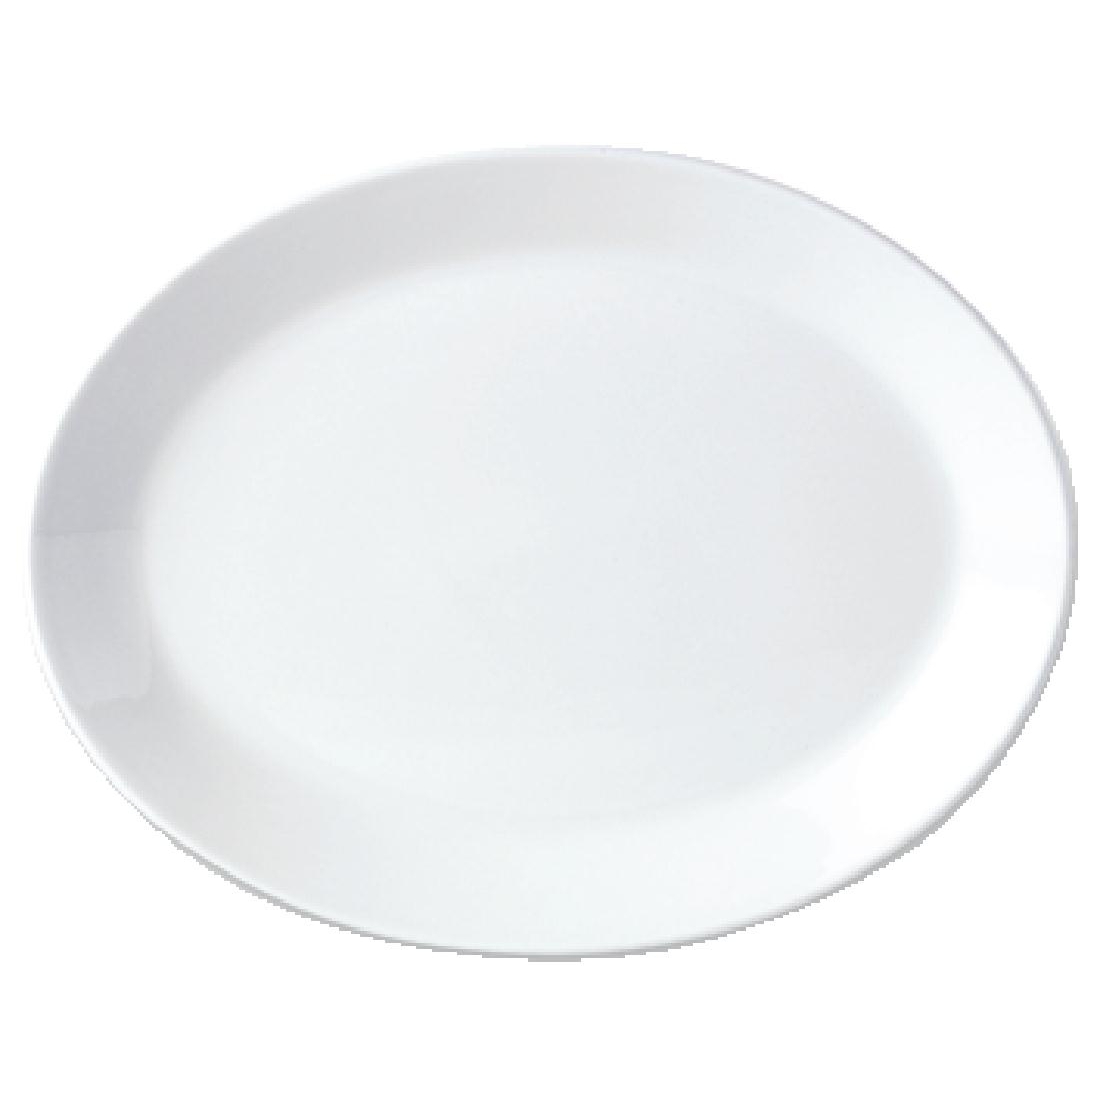 Steelite Simplicity White Oval Coupe Dishes 255mm